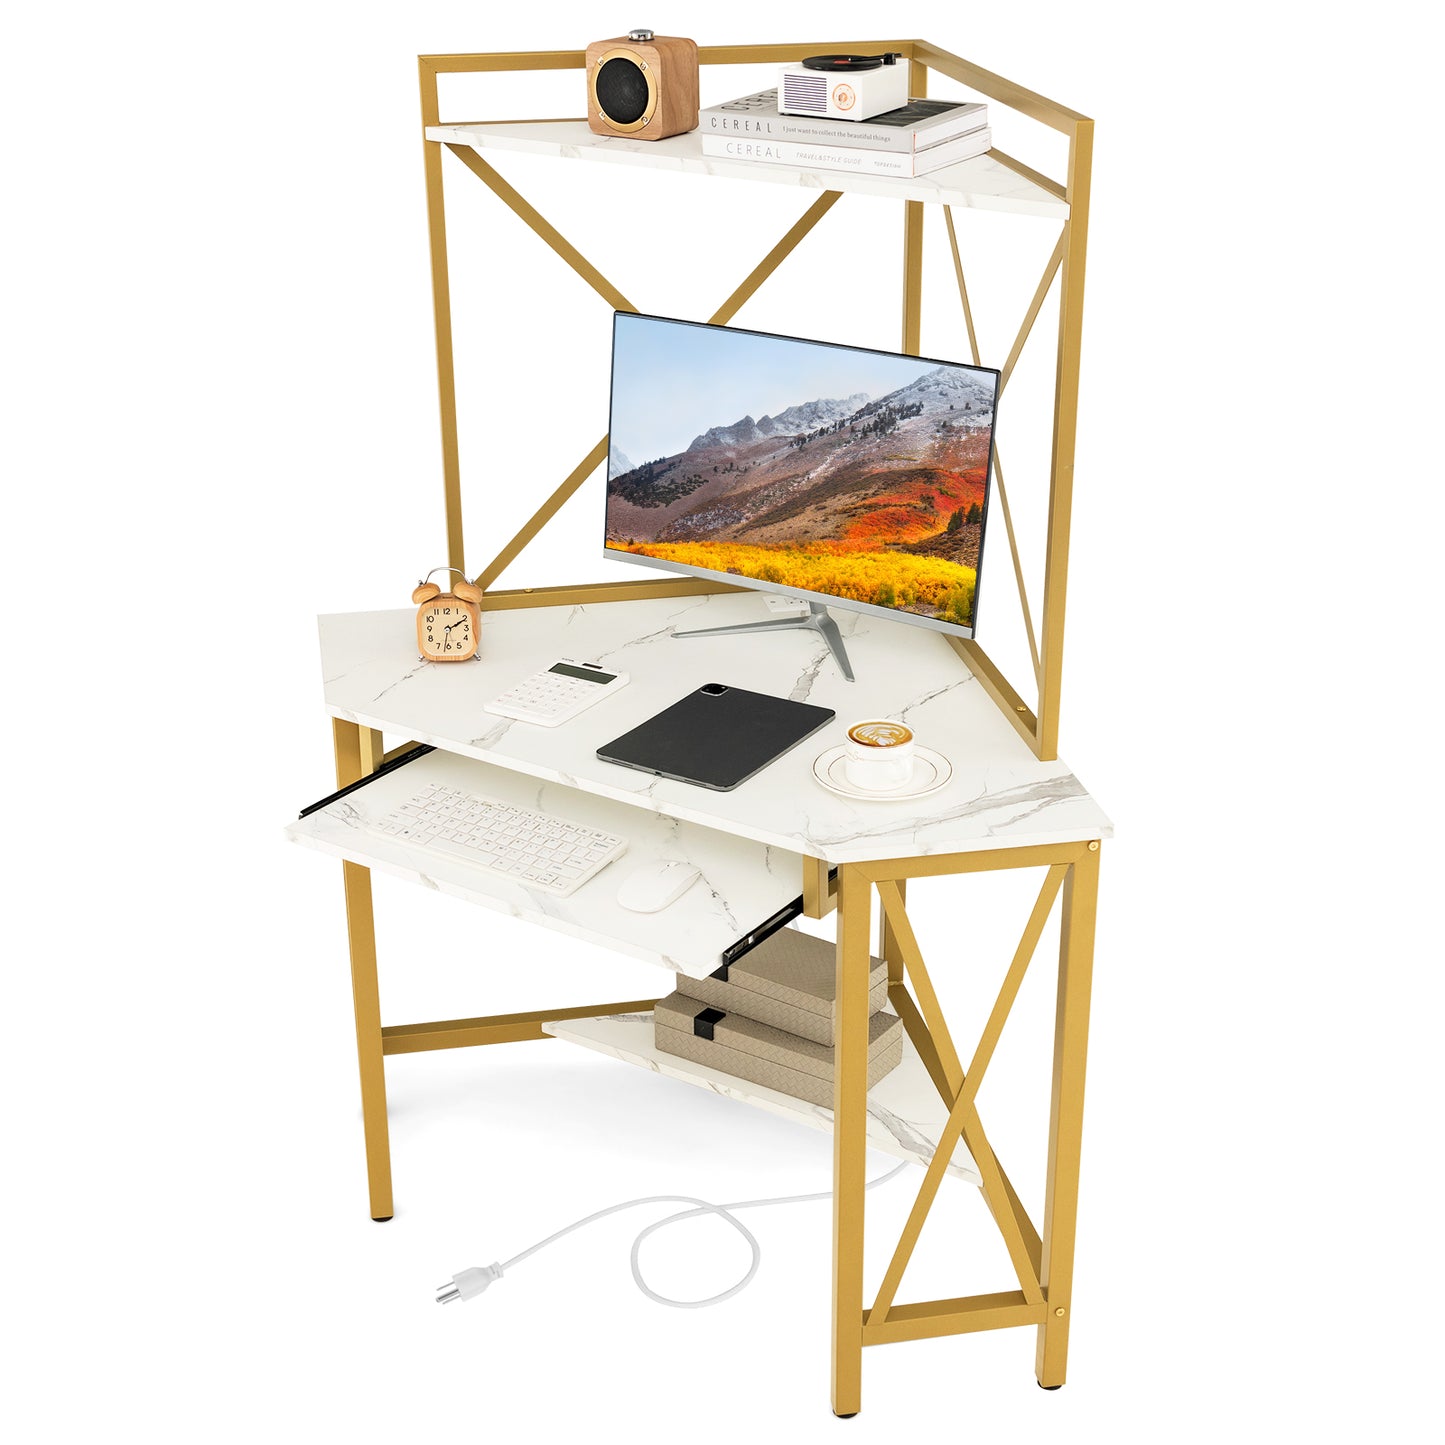 Space-Saving Corner Computer Desk with with Hutch and Keyboard Tray-White